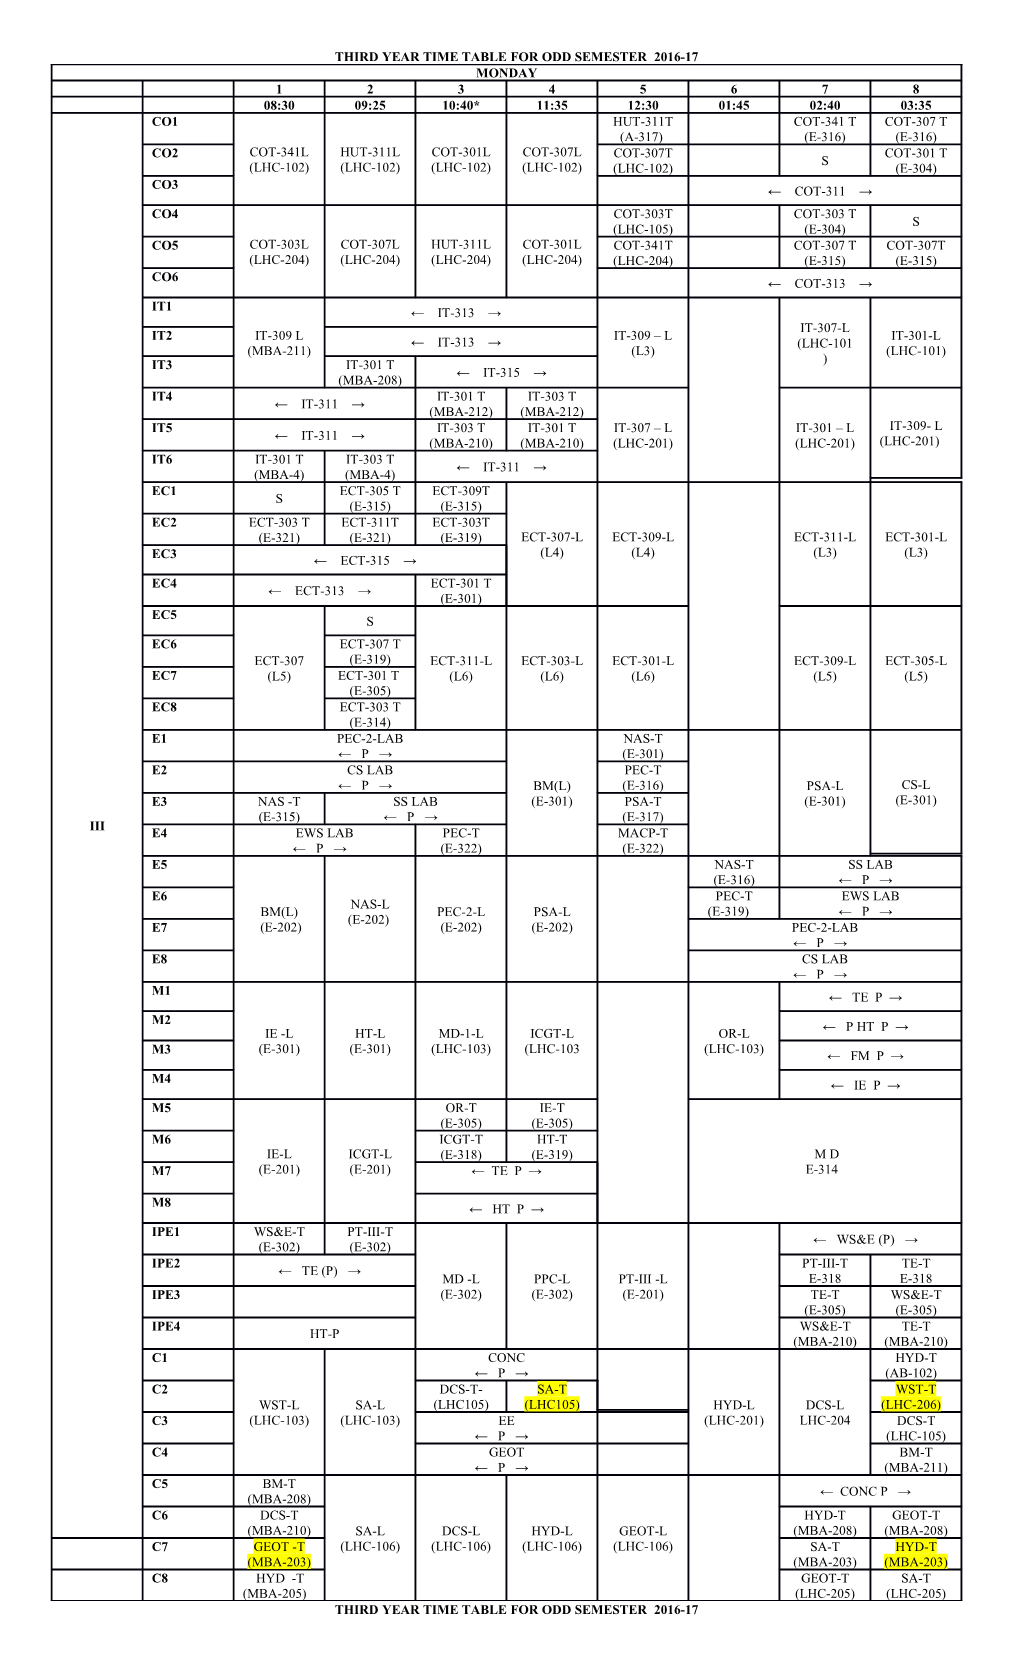 Third Year Time Table for Odd Semester 2016-17